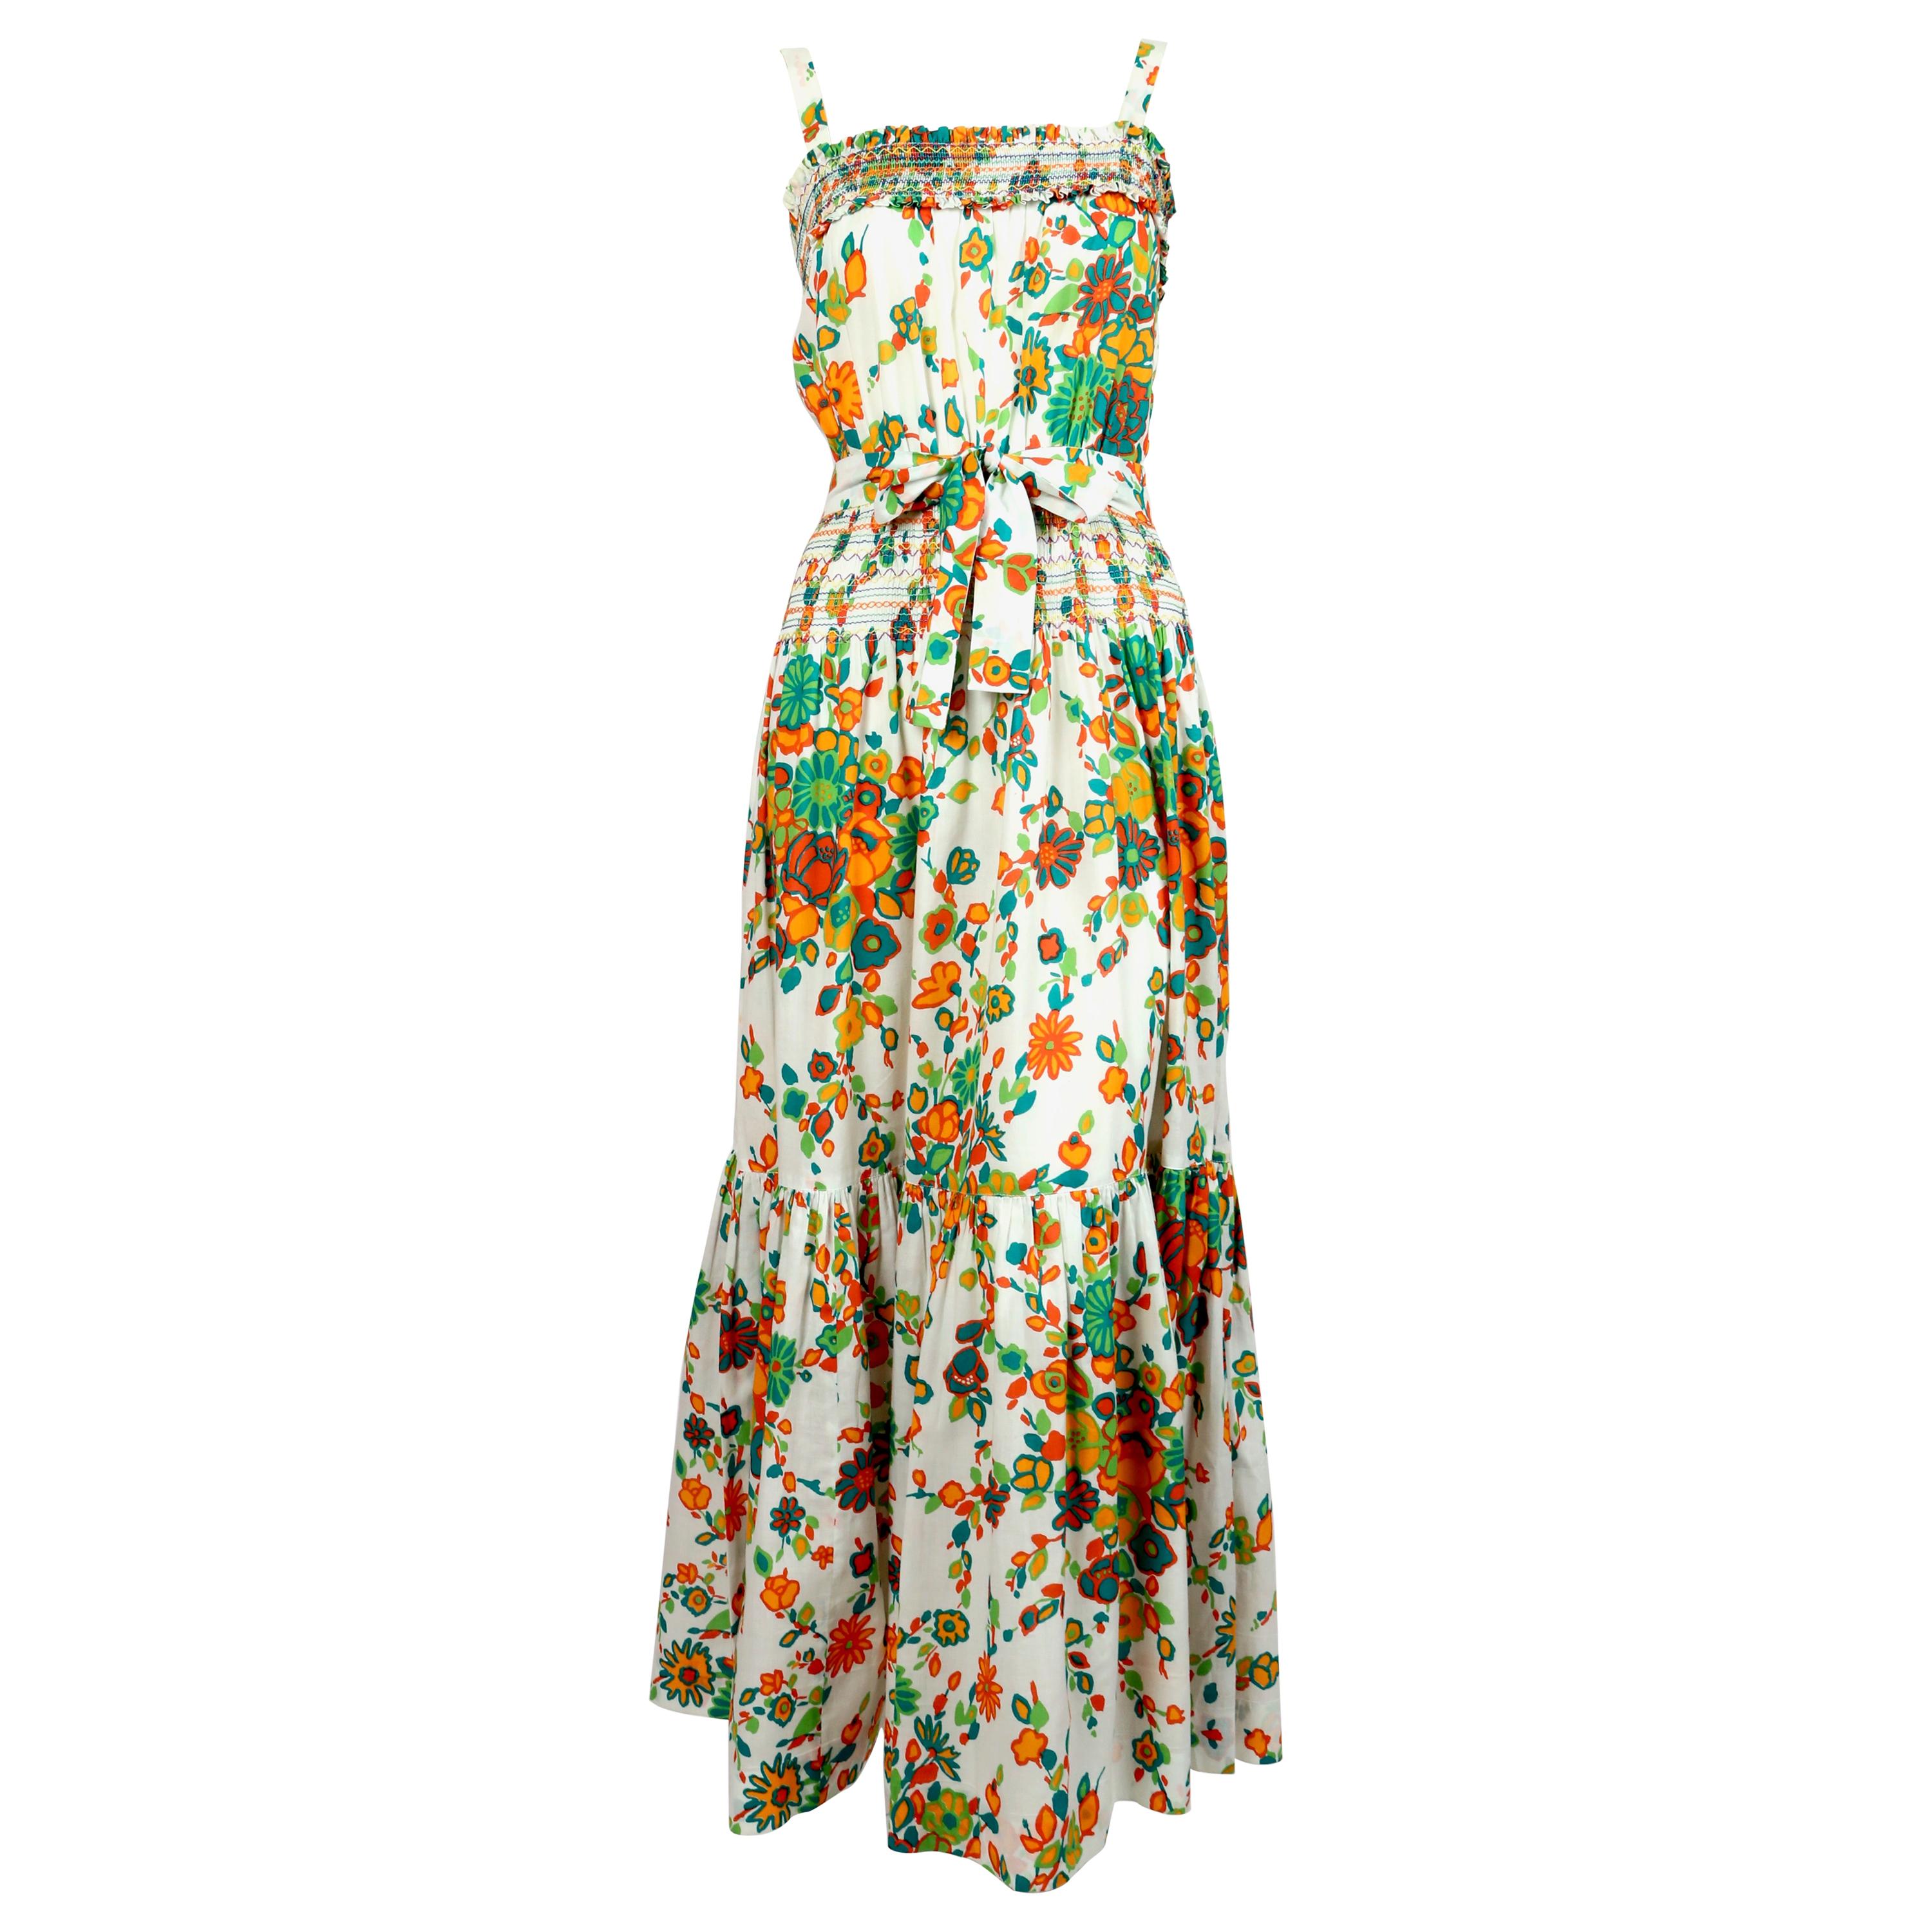 1970's YVES SAINT LAURENT cotton floral dress with embroidery & pleating